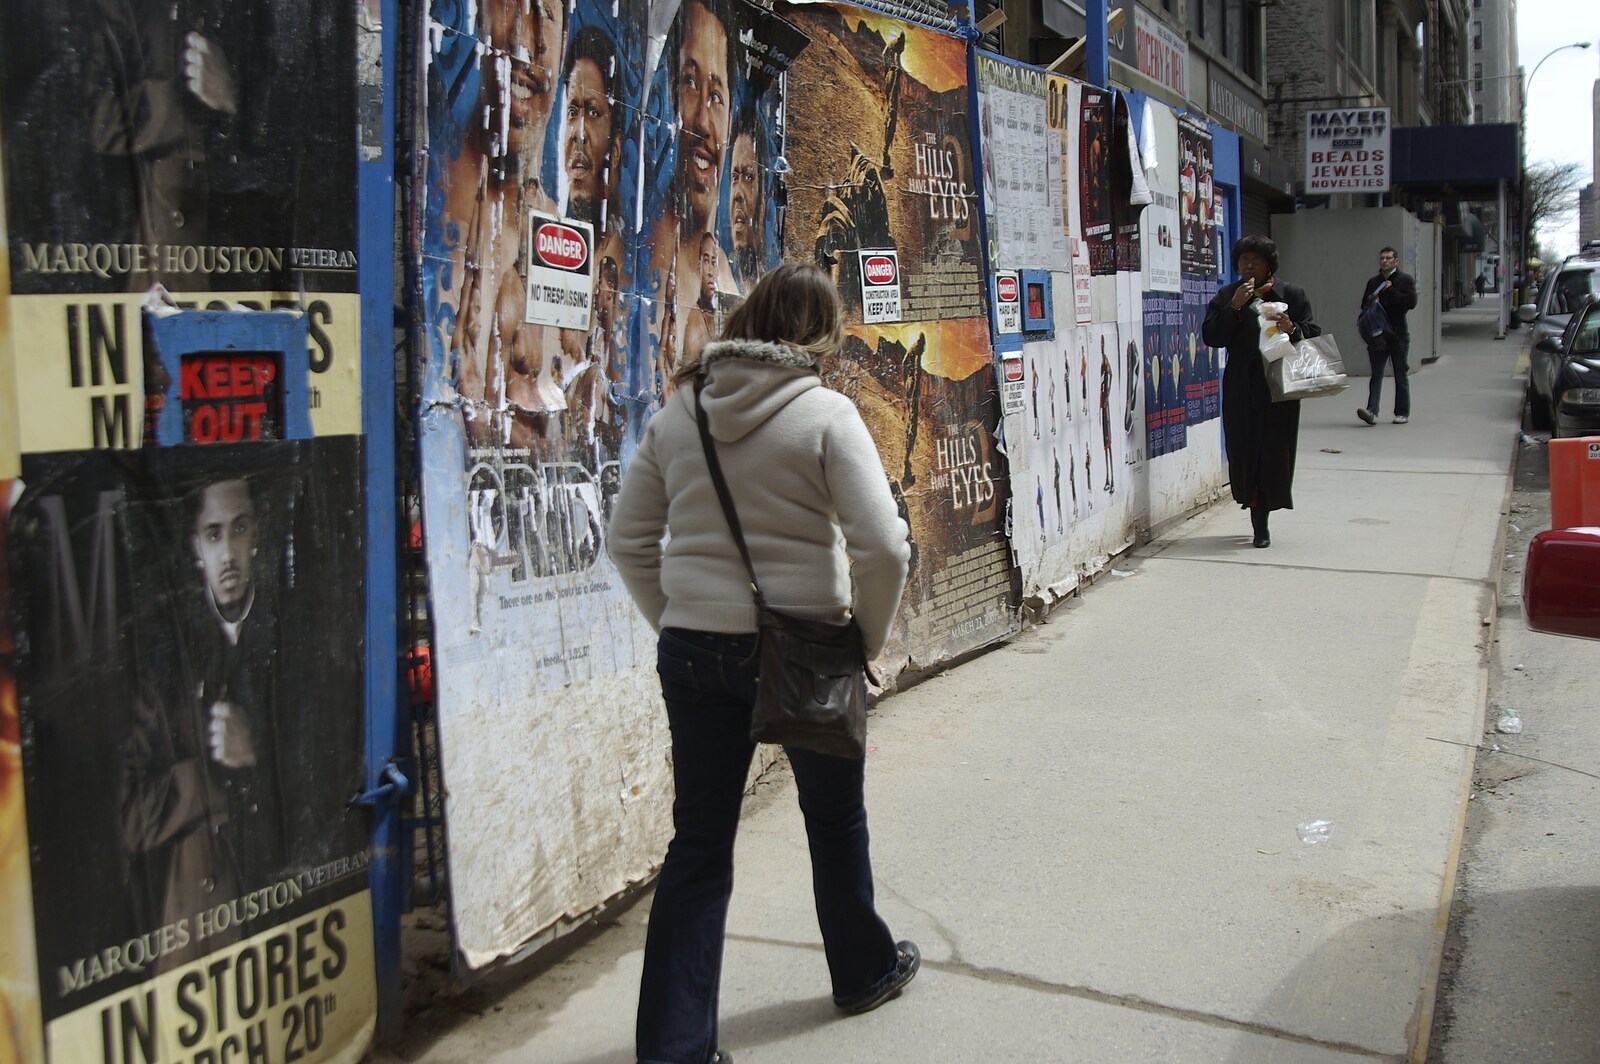 Crossing Brooklyn Bridge, New York, US - 26th March 2007: Isobel walks past some pasted posters